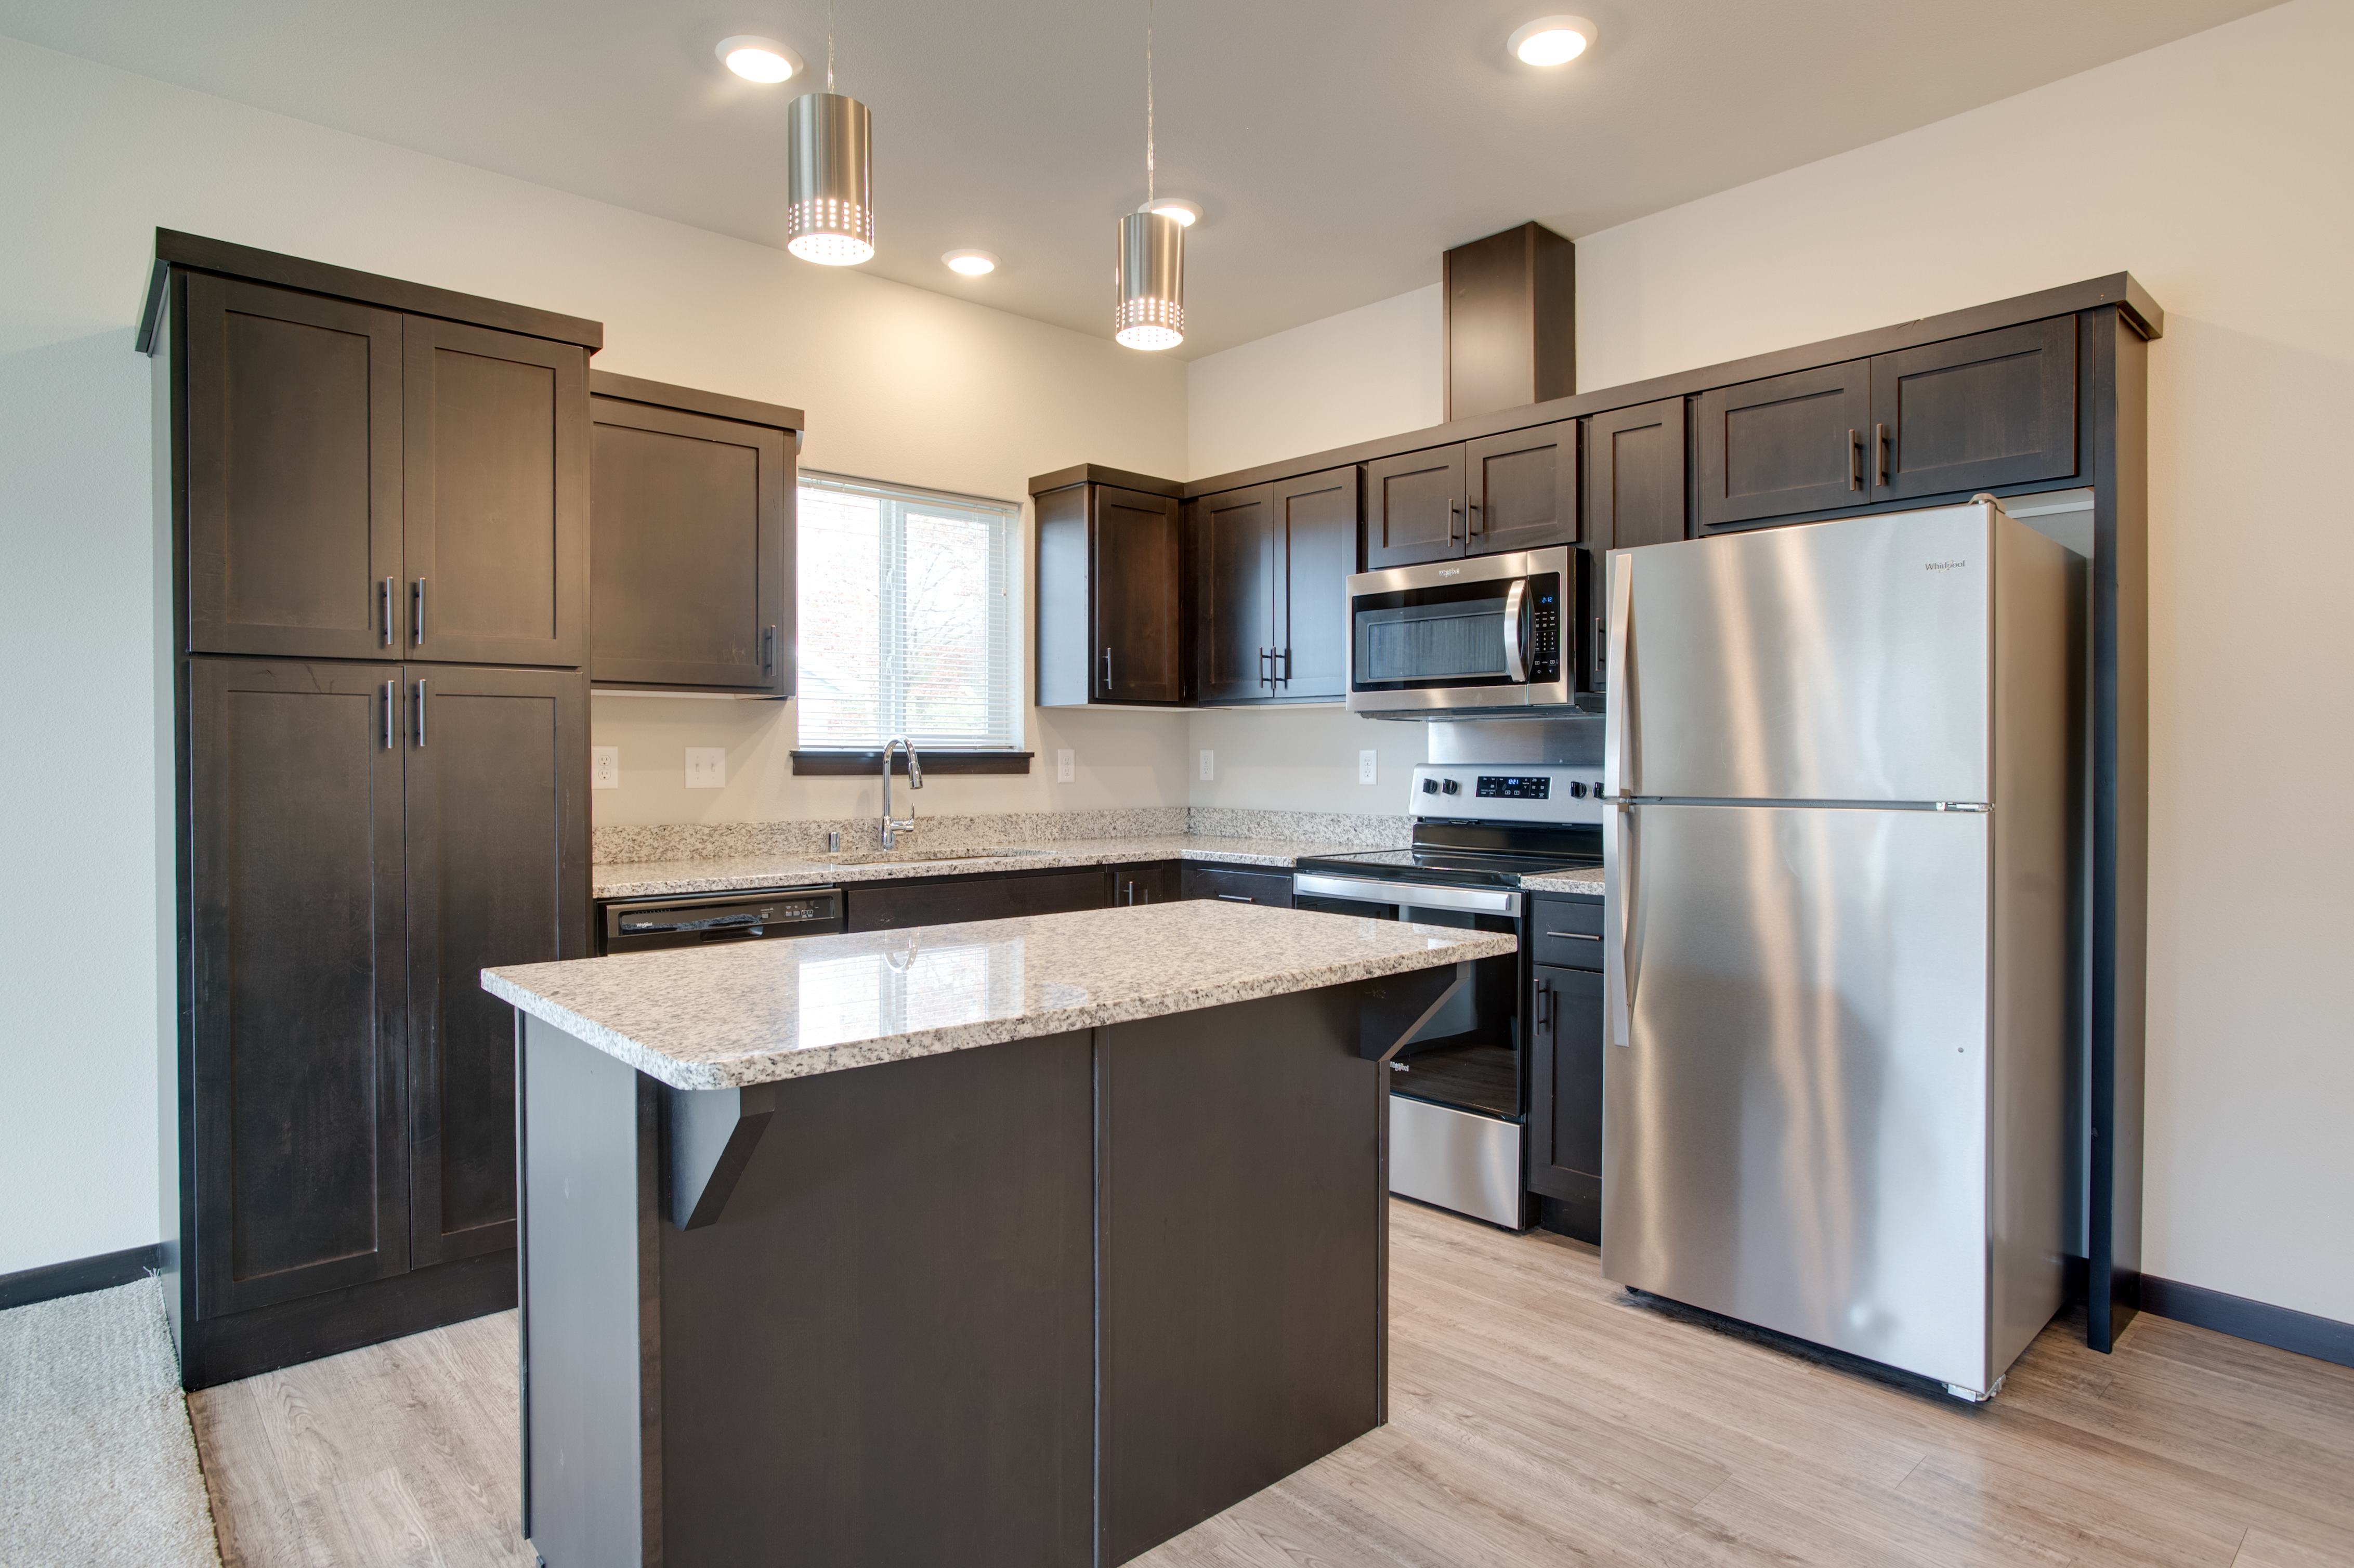 Kitchen with stainless steel appliances and granite counter tops